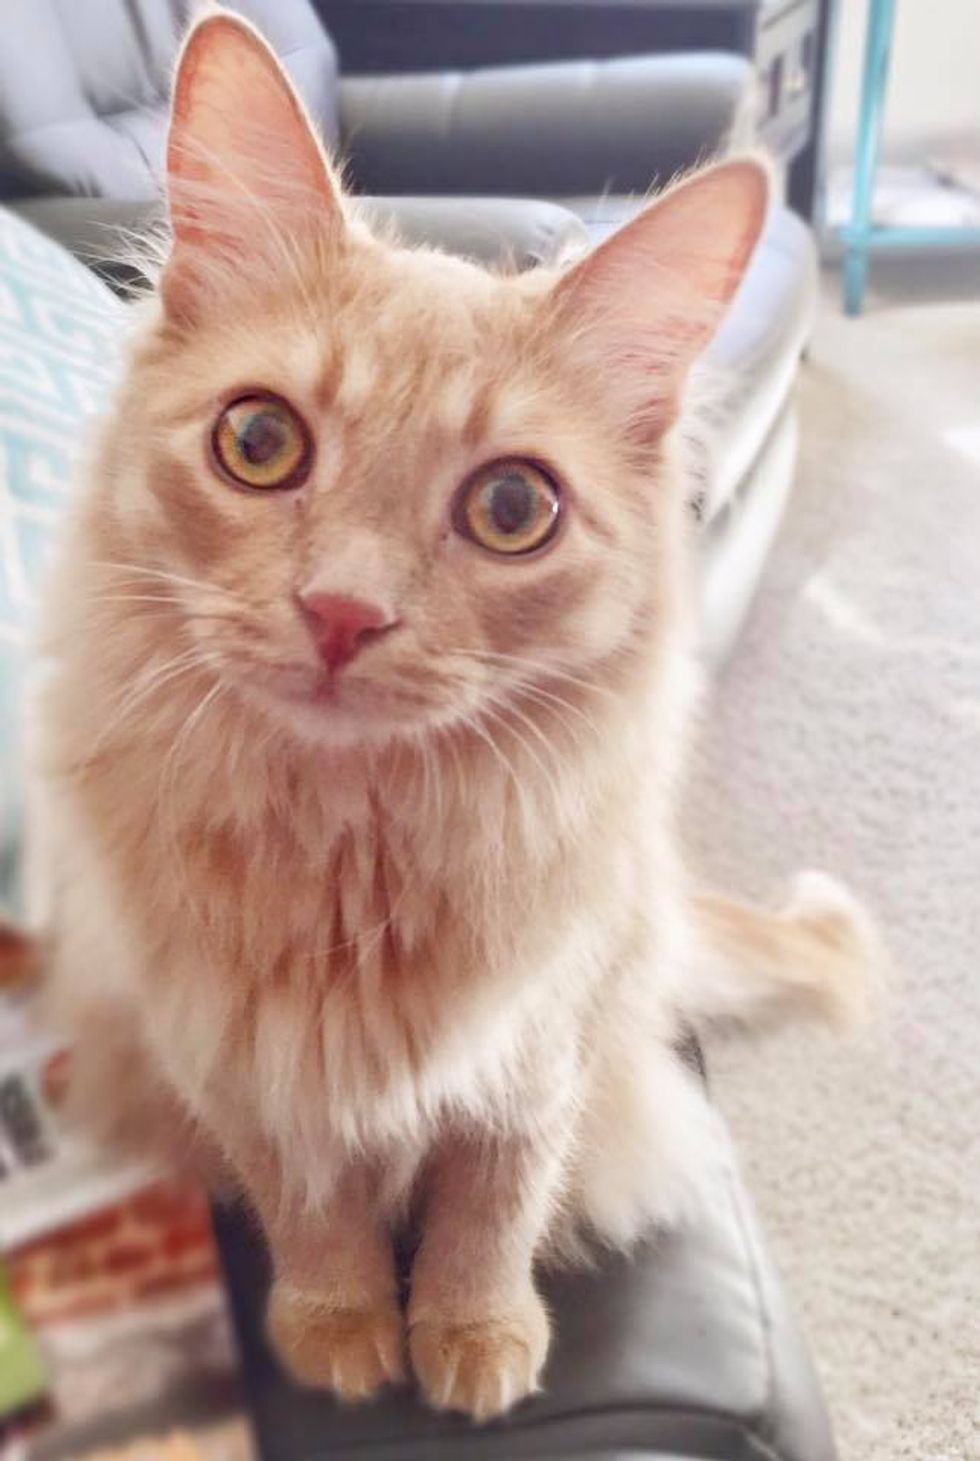 Kitten With Missing Foot Tells His Rescuers in Raspy Meow How Thankful